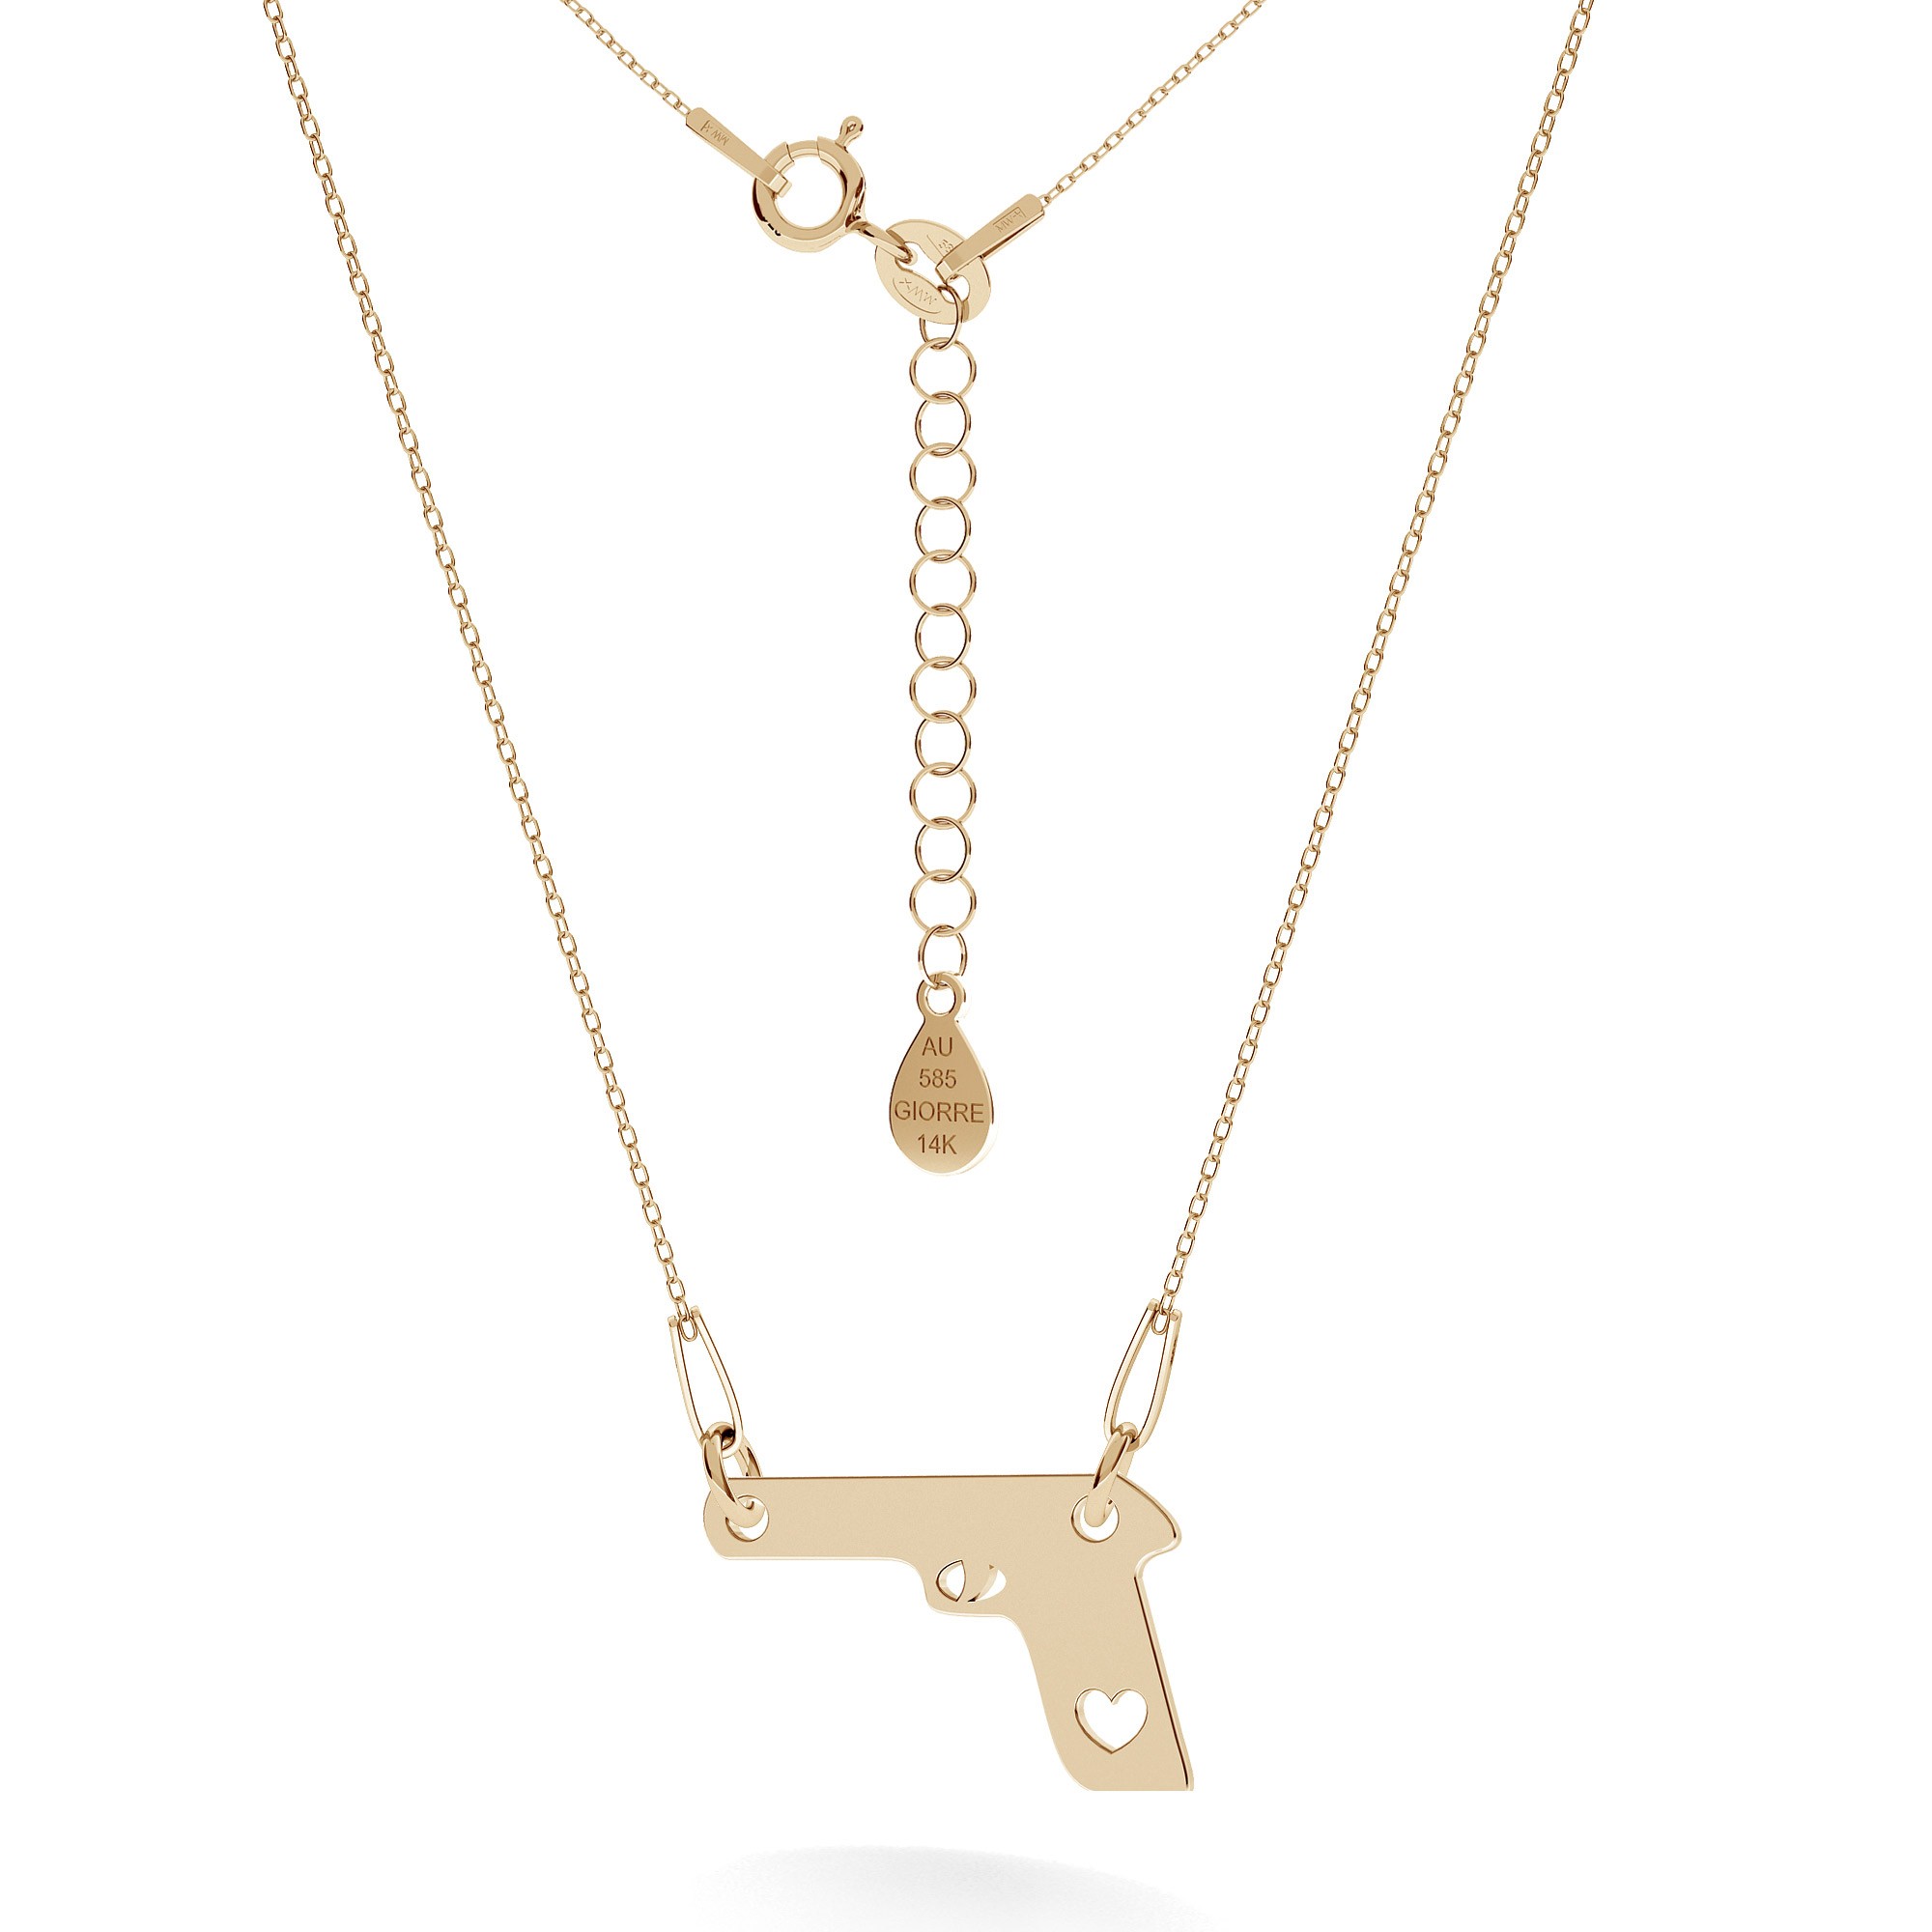 GOLD GUN WITH HEARTS NECKLACE 14K